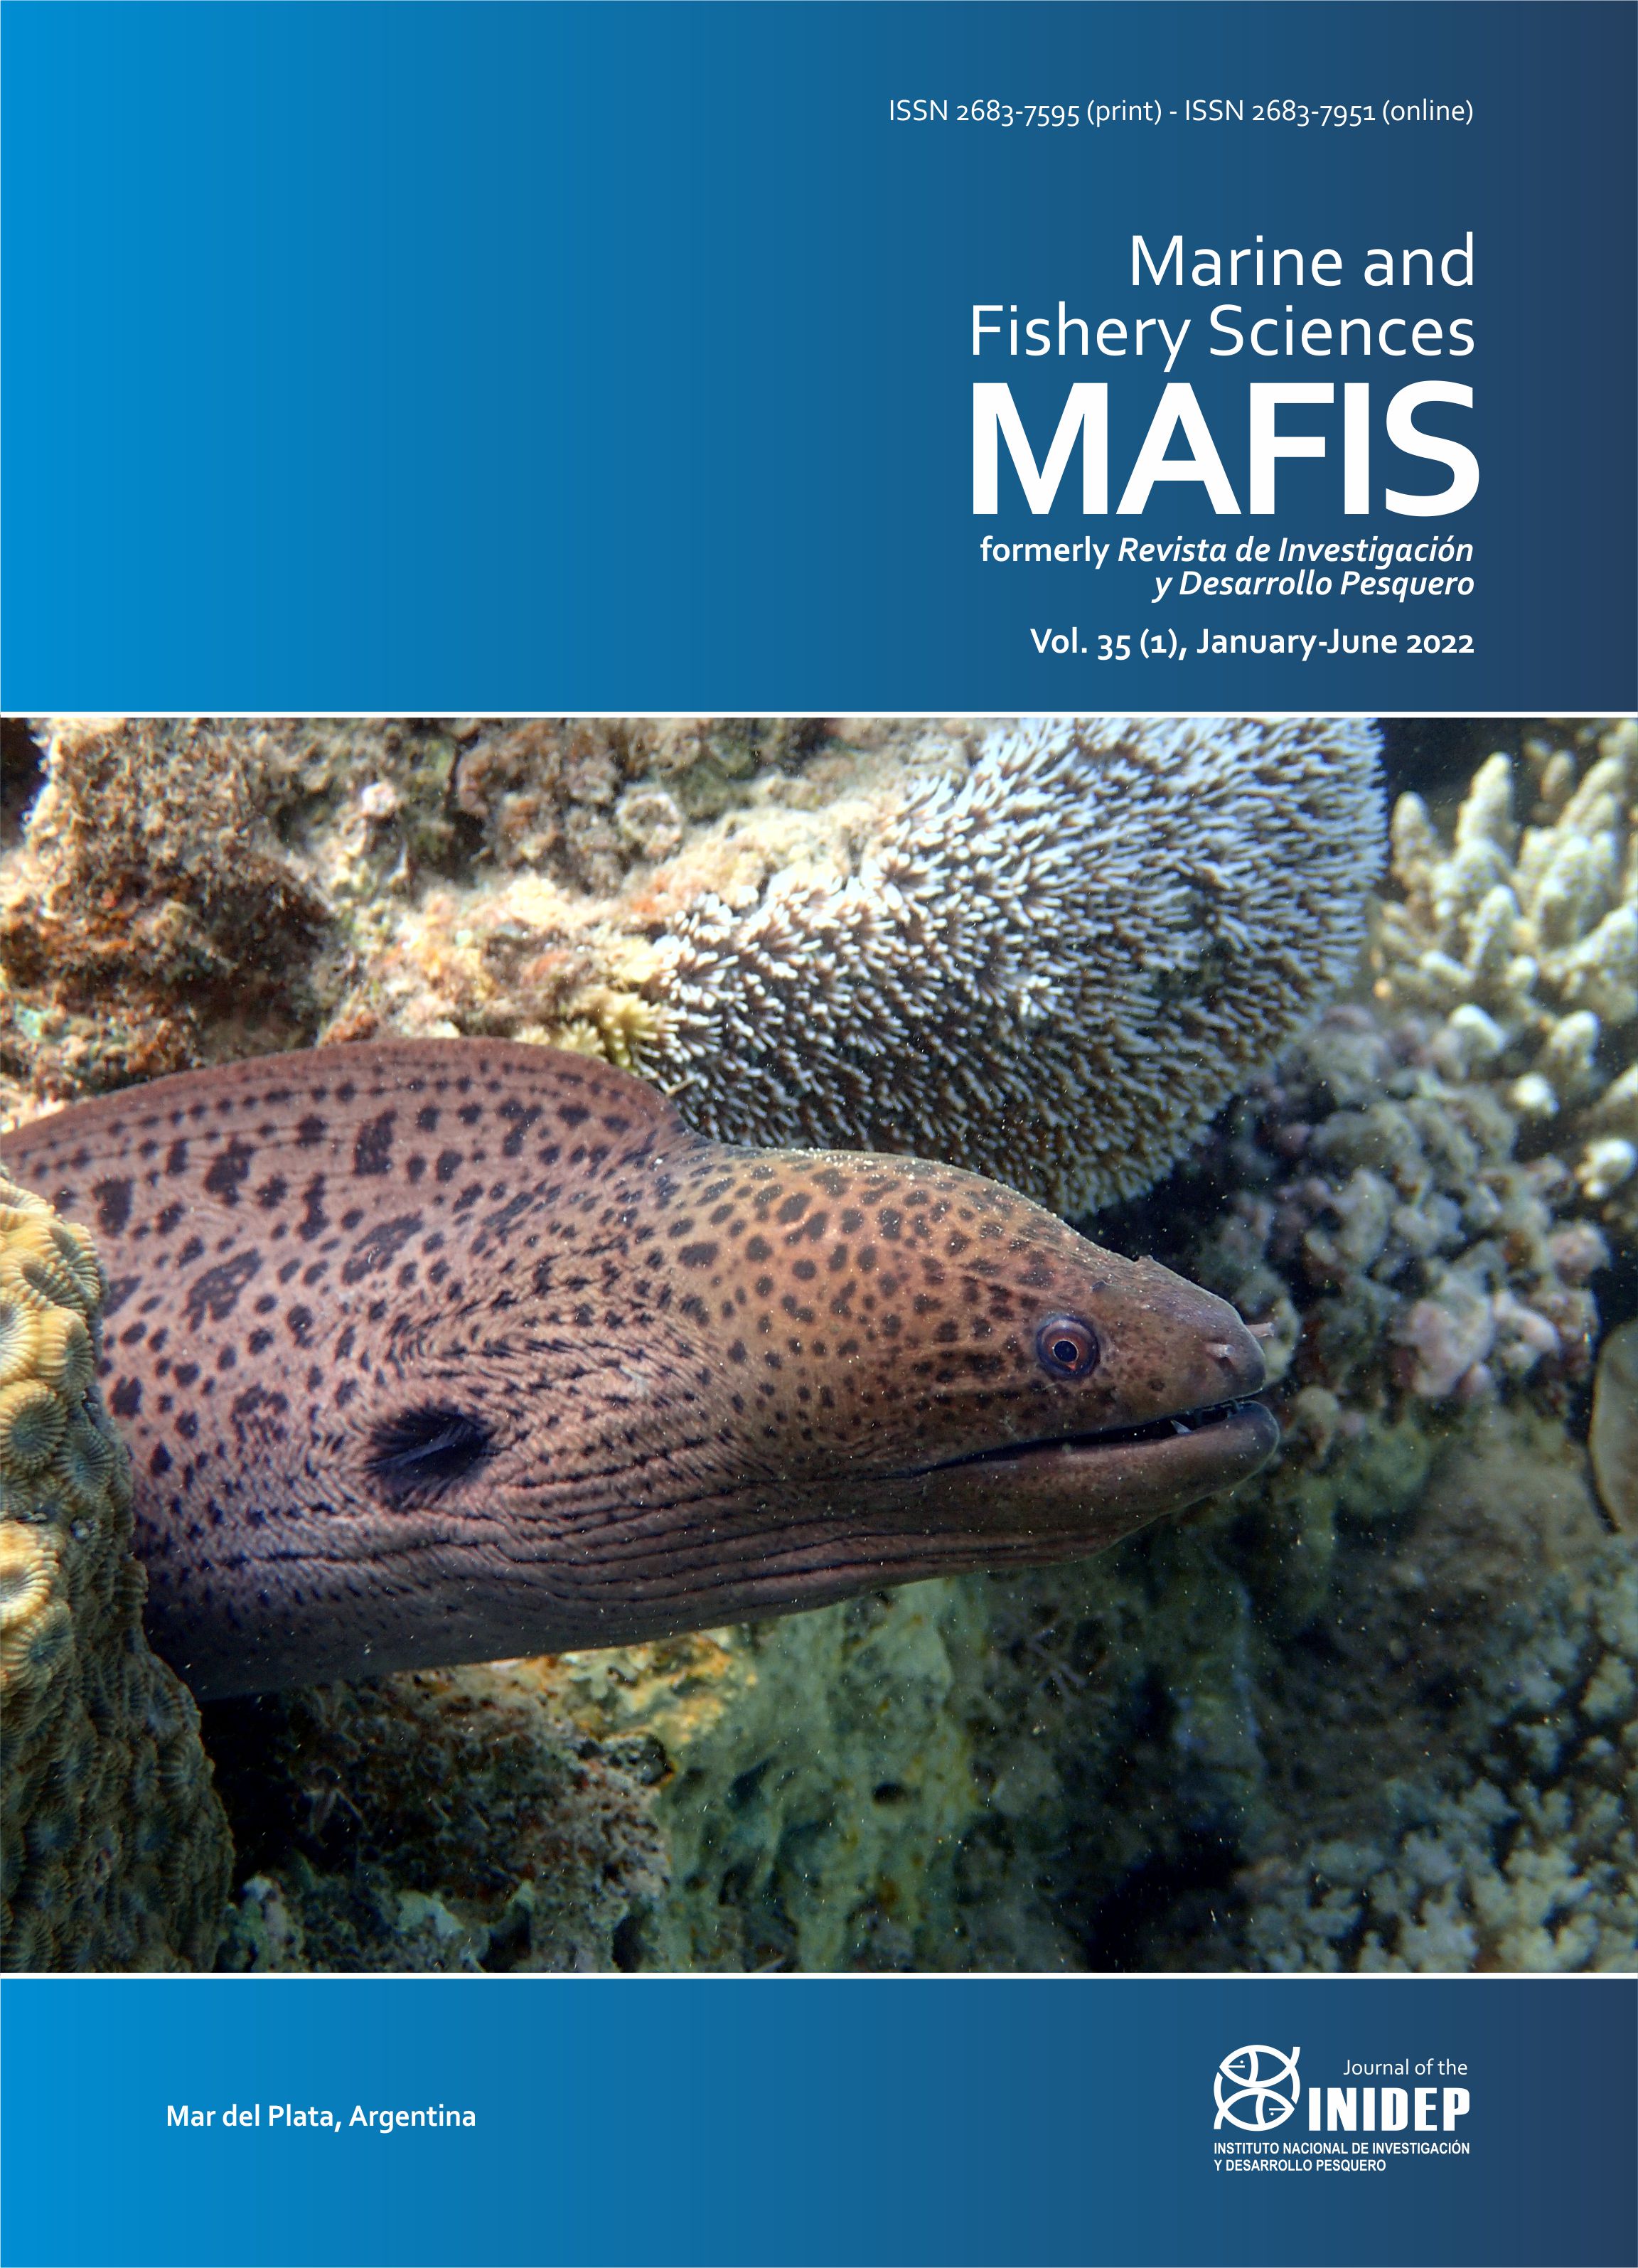 					View Vol. 35 No. 1 (2022): Marine and Fishery Sciences (MAFIS)
				